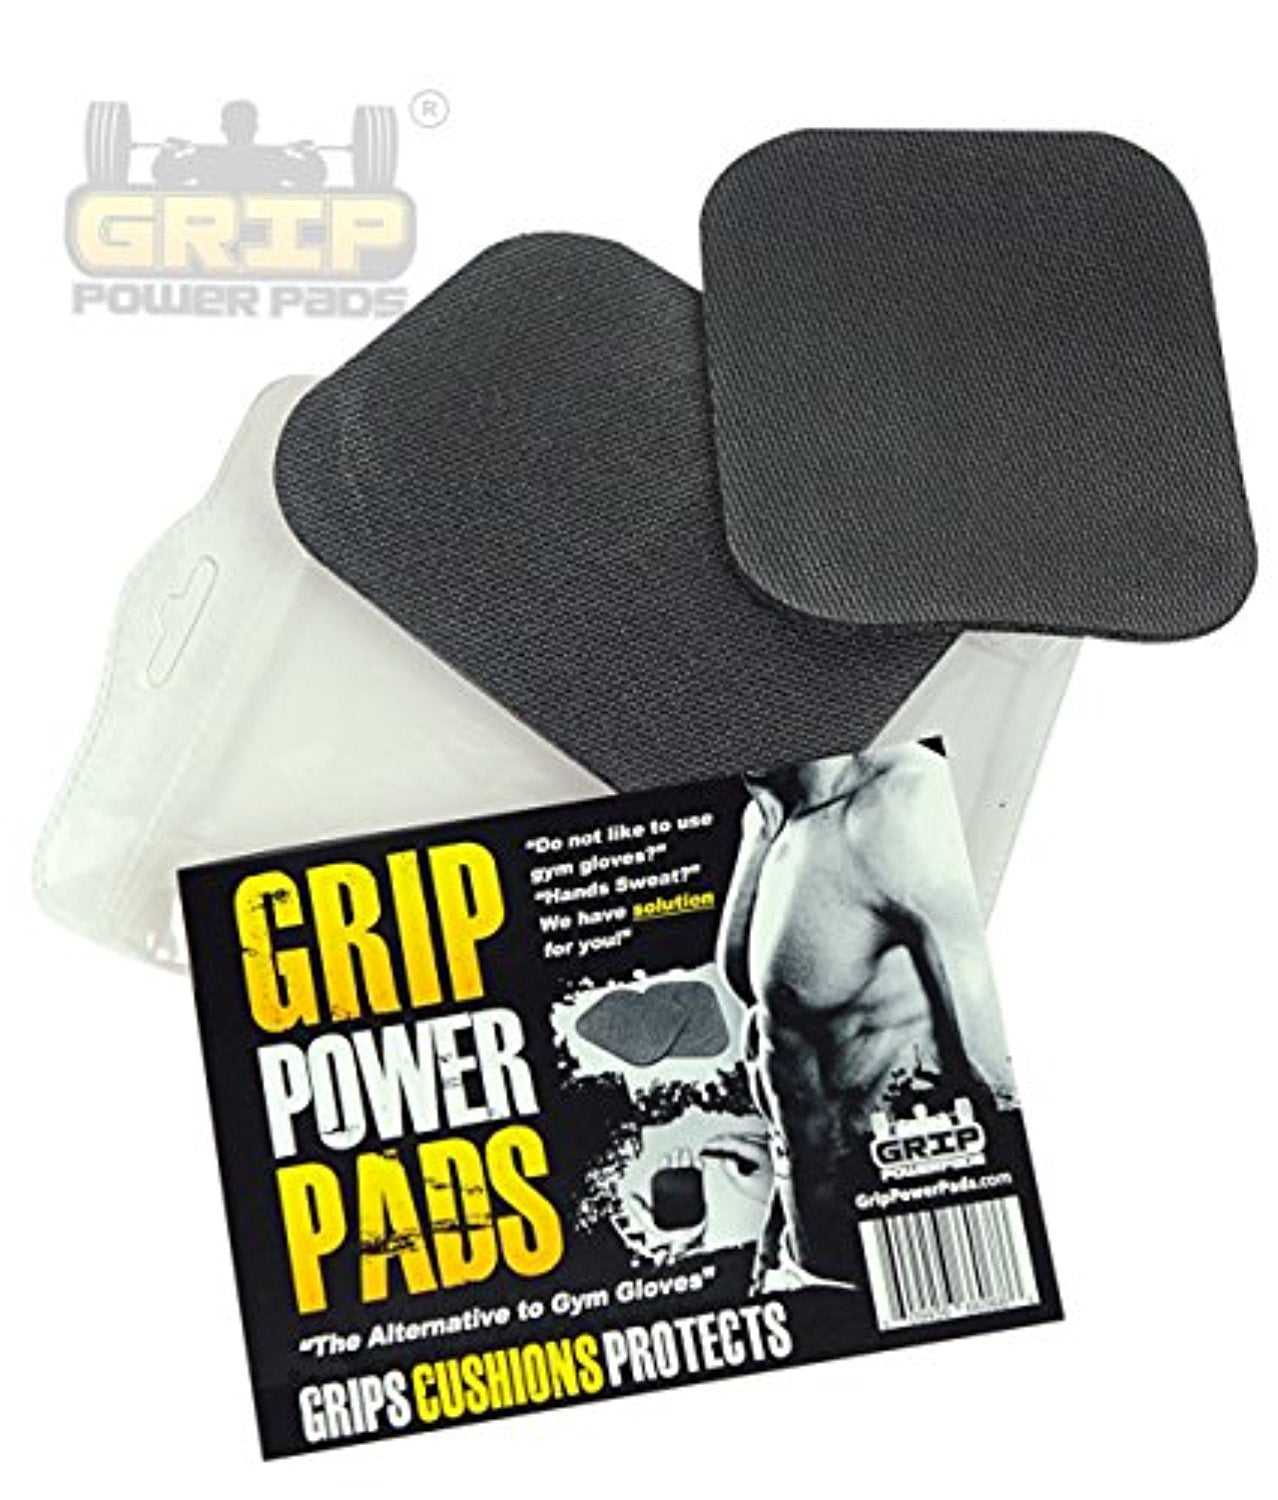 Grip Power Pads Pro - Lifting Grips The Alternative to Gym Gloves Workout Gloves